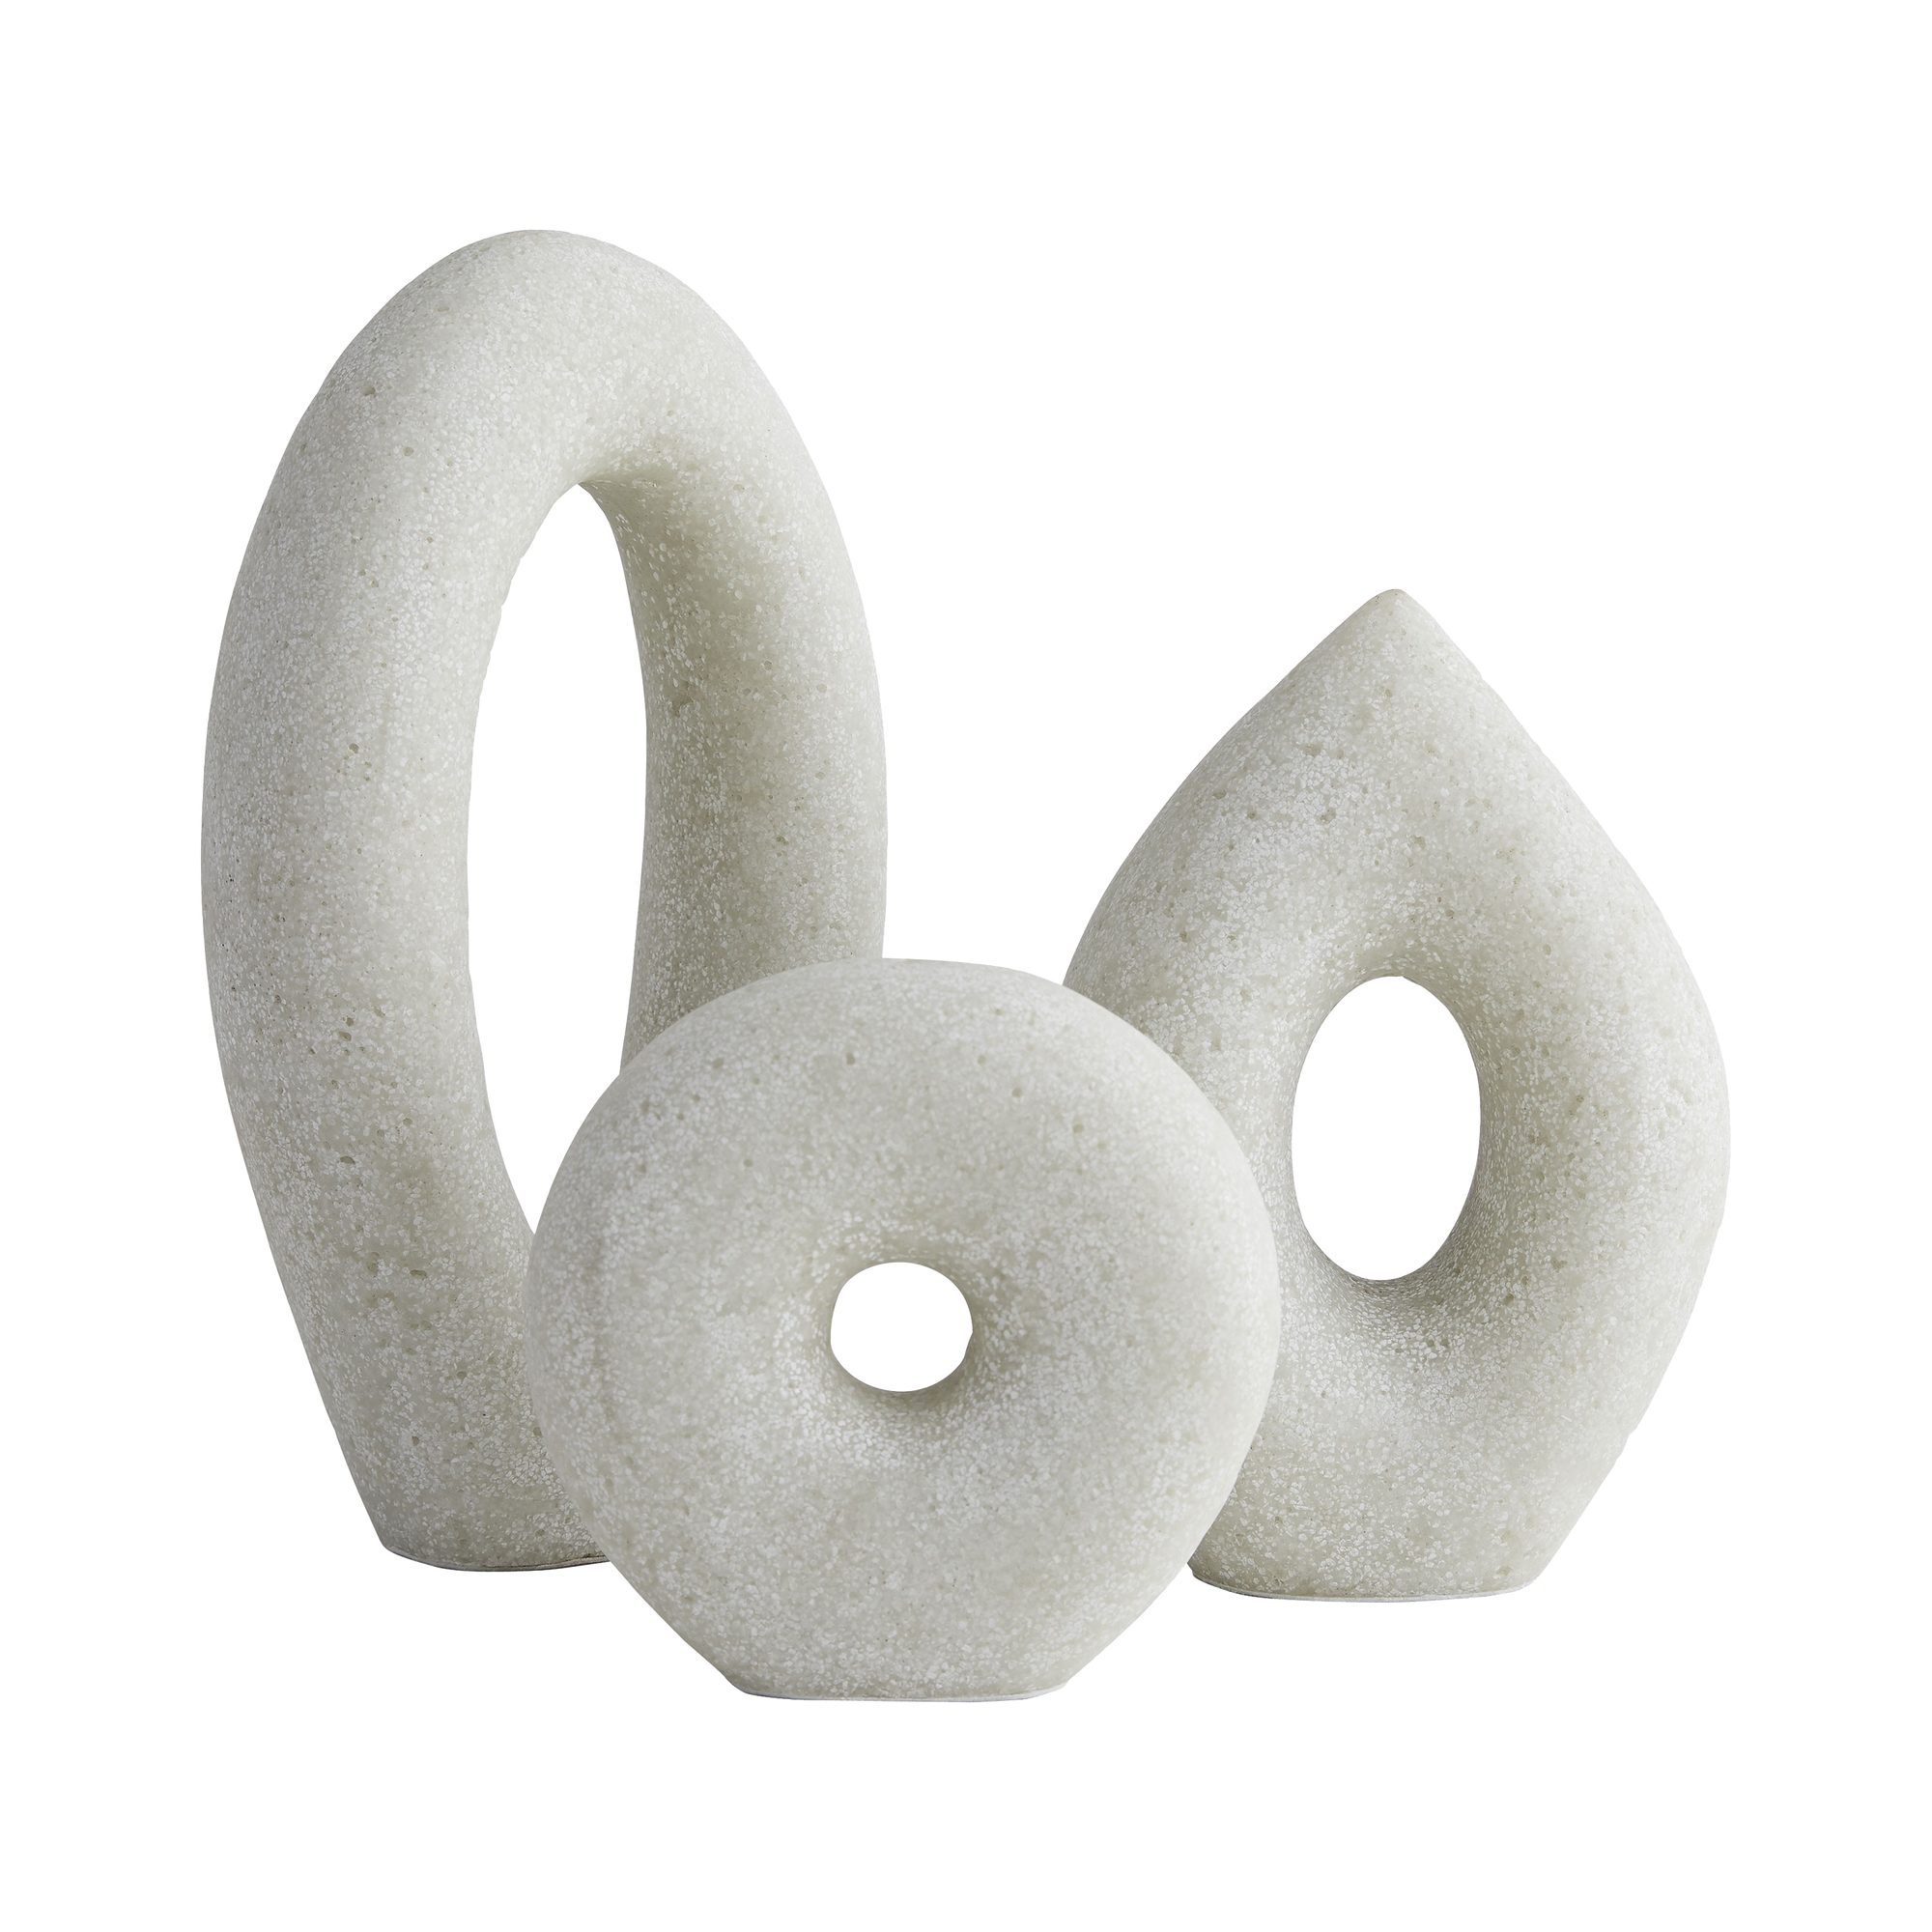 Crafted from rice stone, the expressive form of sculptural art takes shape in this well-formed trio.